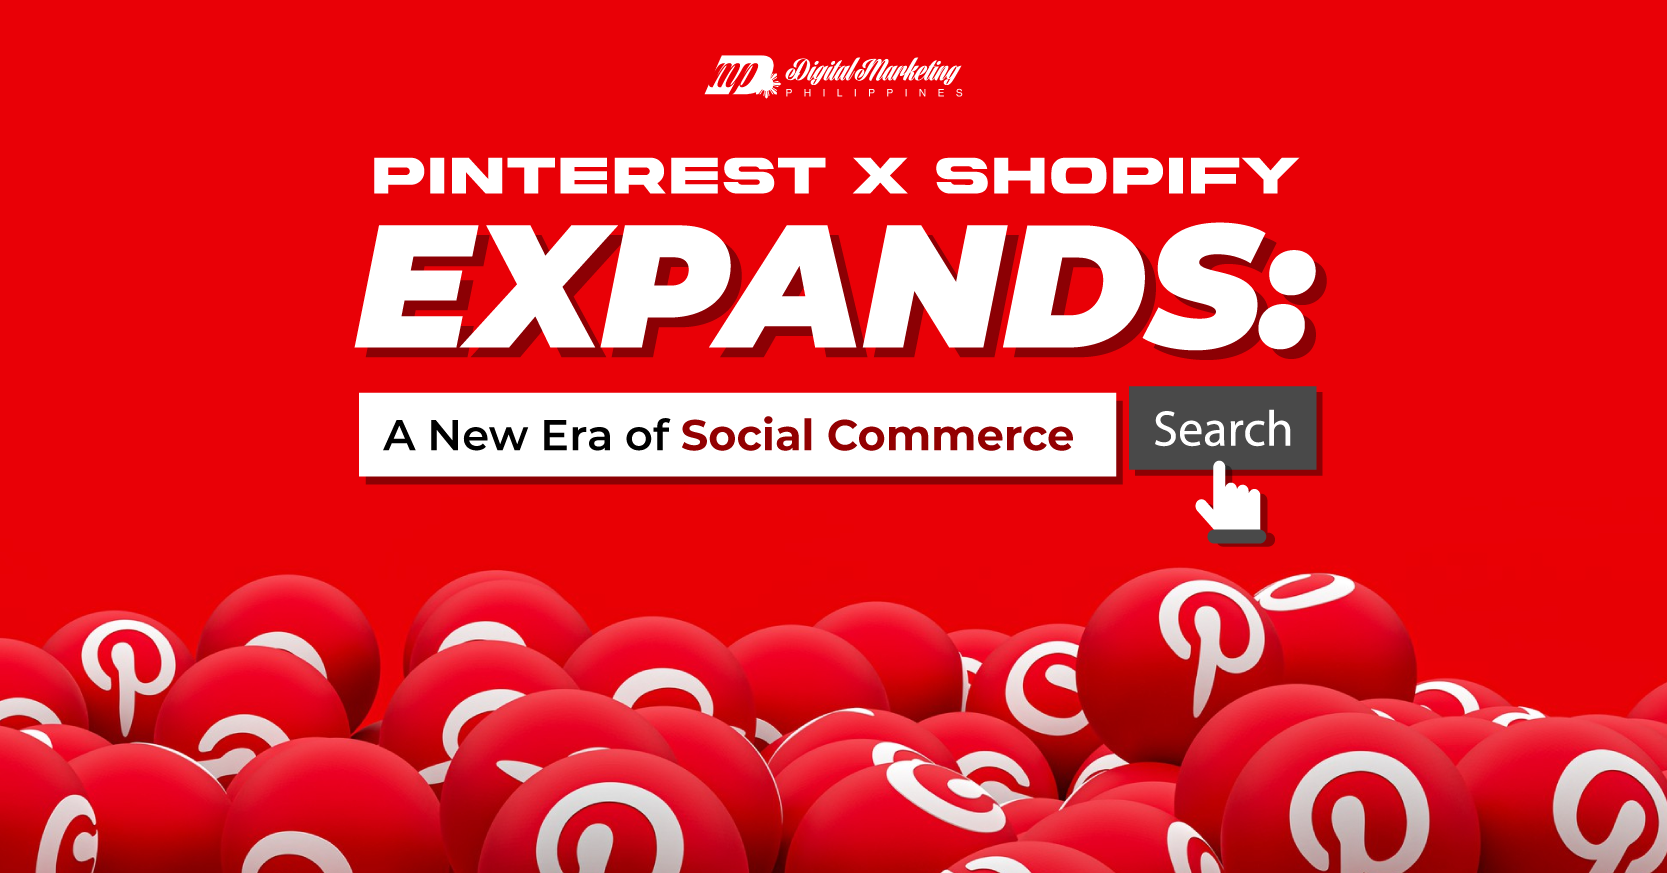 Pinterest X Shopify Expands: A New Era of Social Commerce featured image